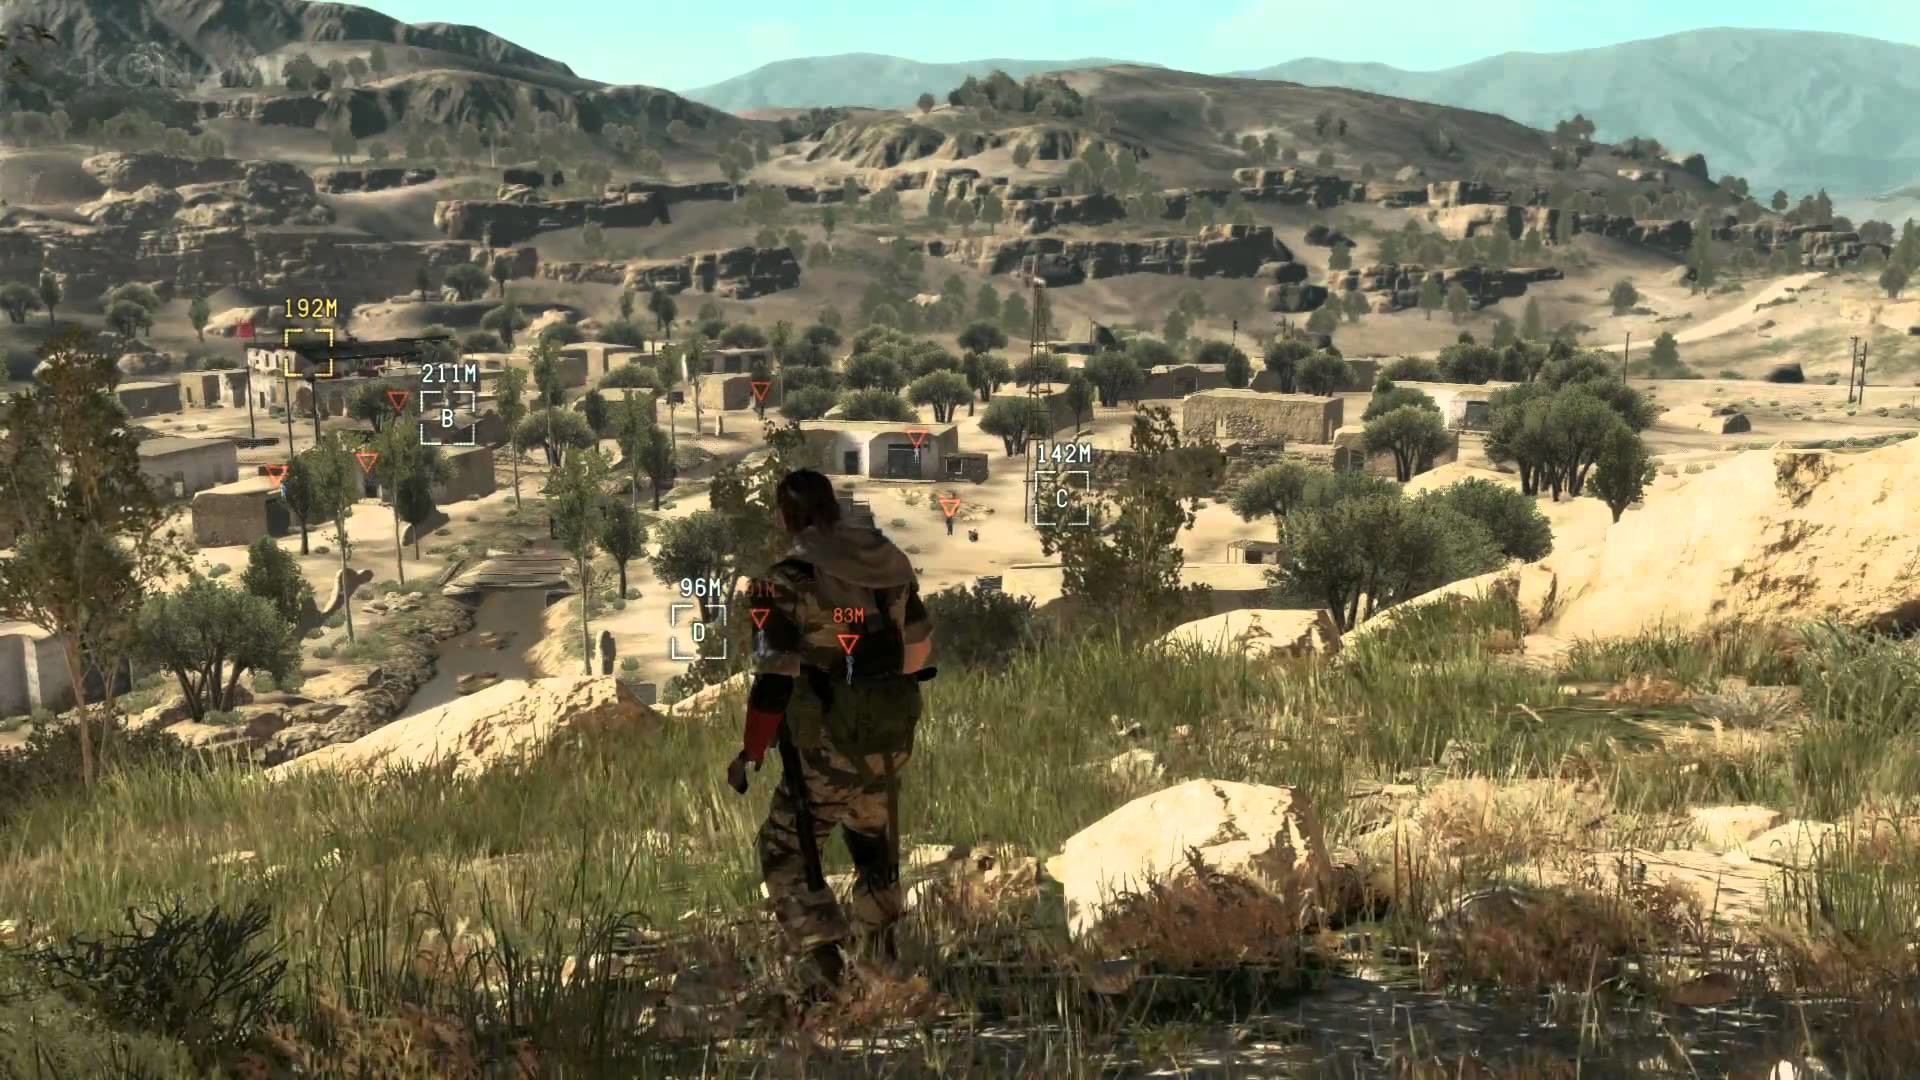 1920x1080 Metal Gear Solid 5: The Phantom Pain - E3 2014 Gameplay Demo with Dev  Comments (EN) - YouTube